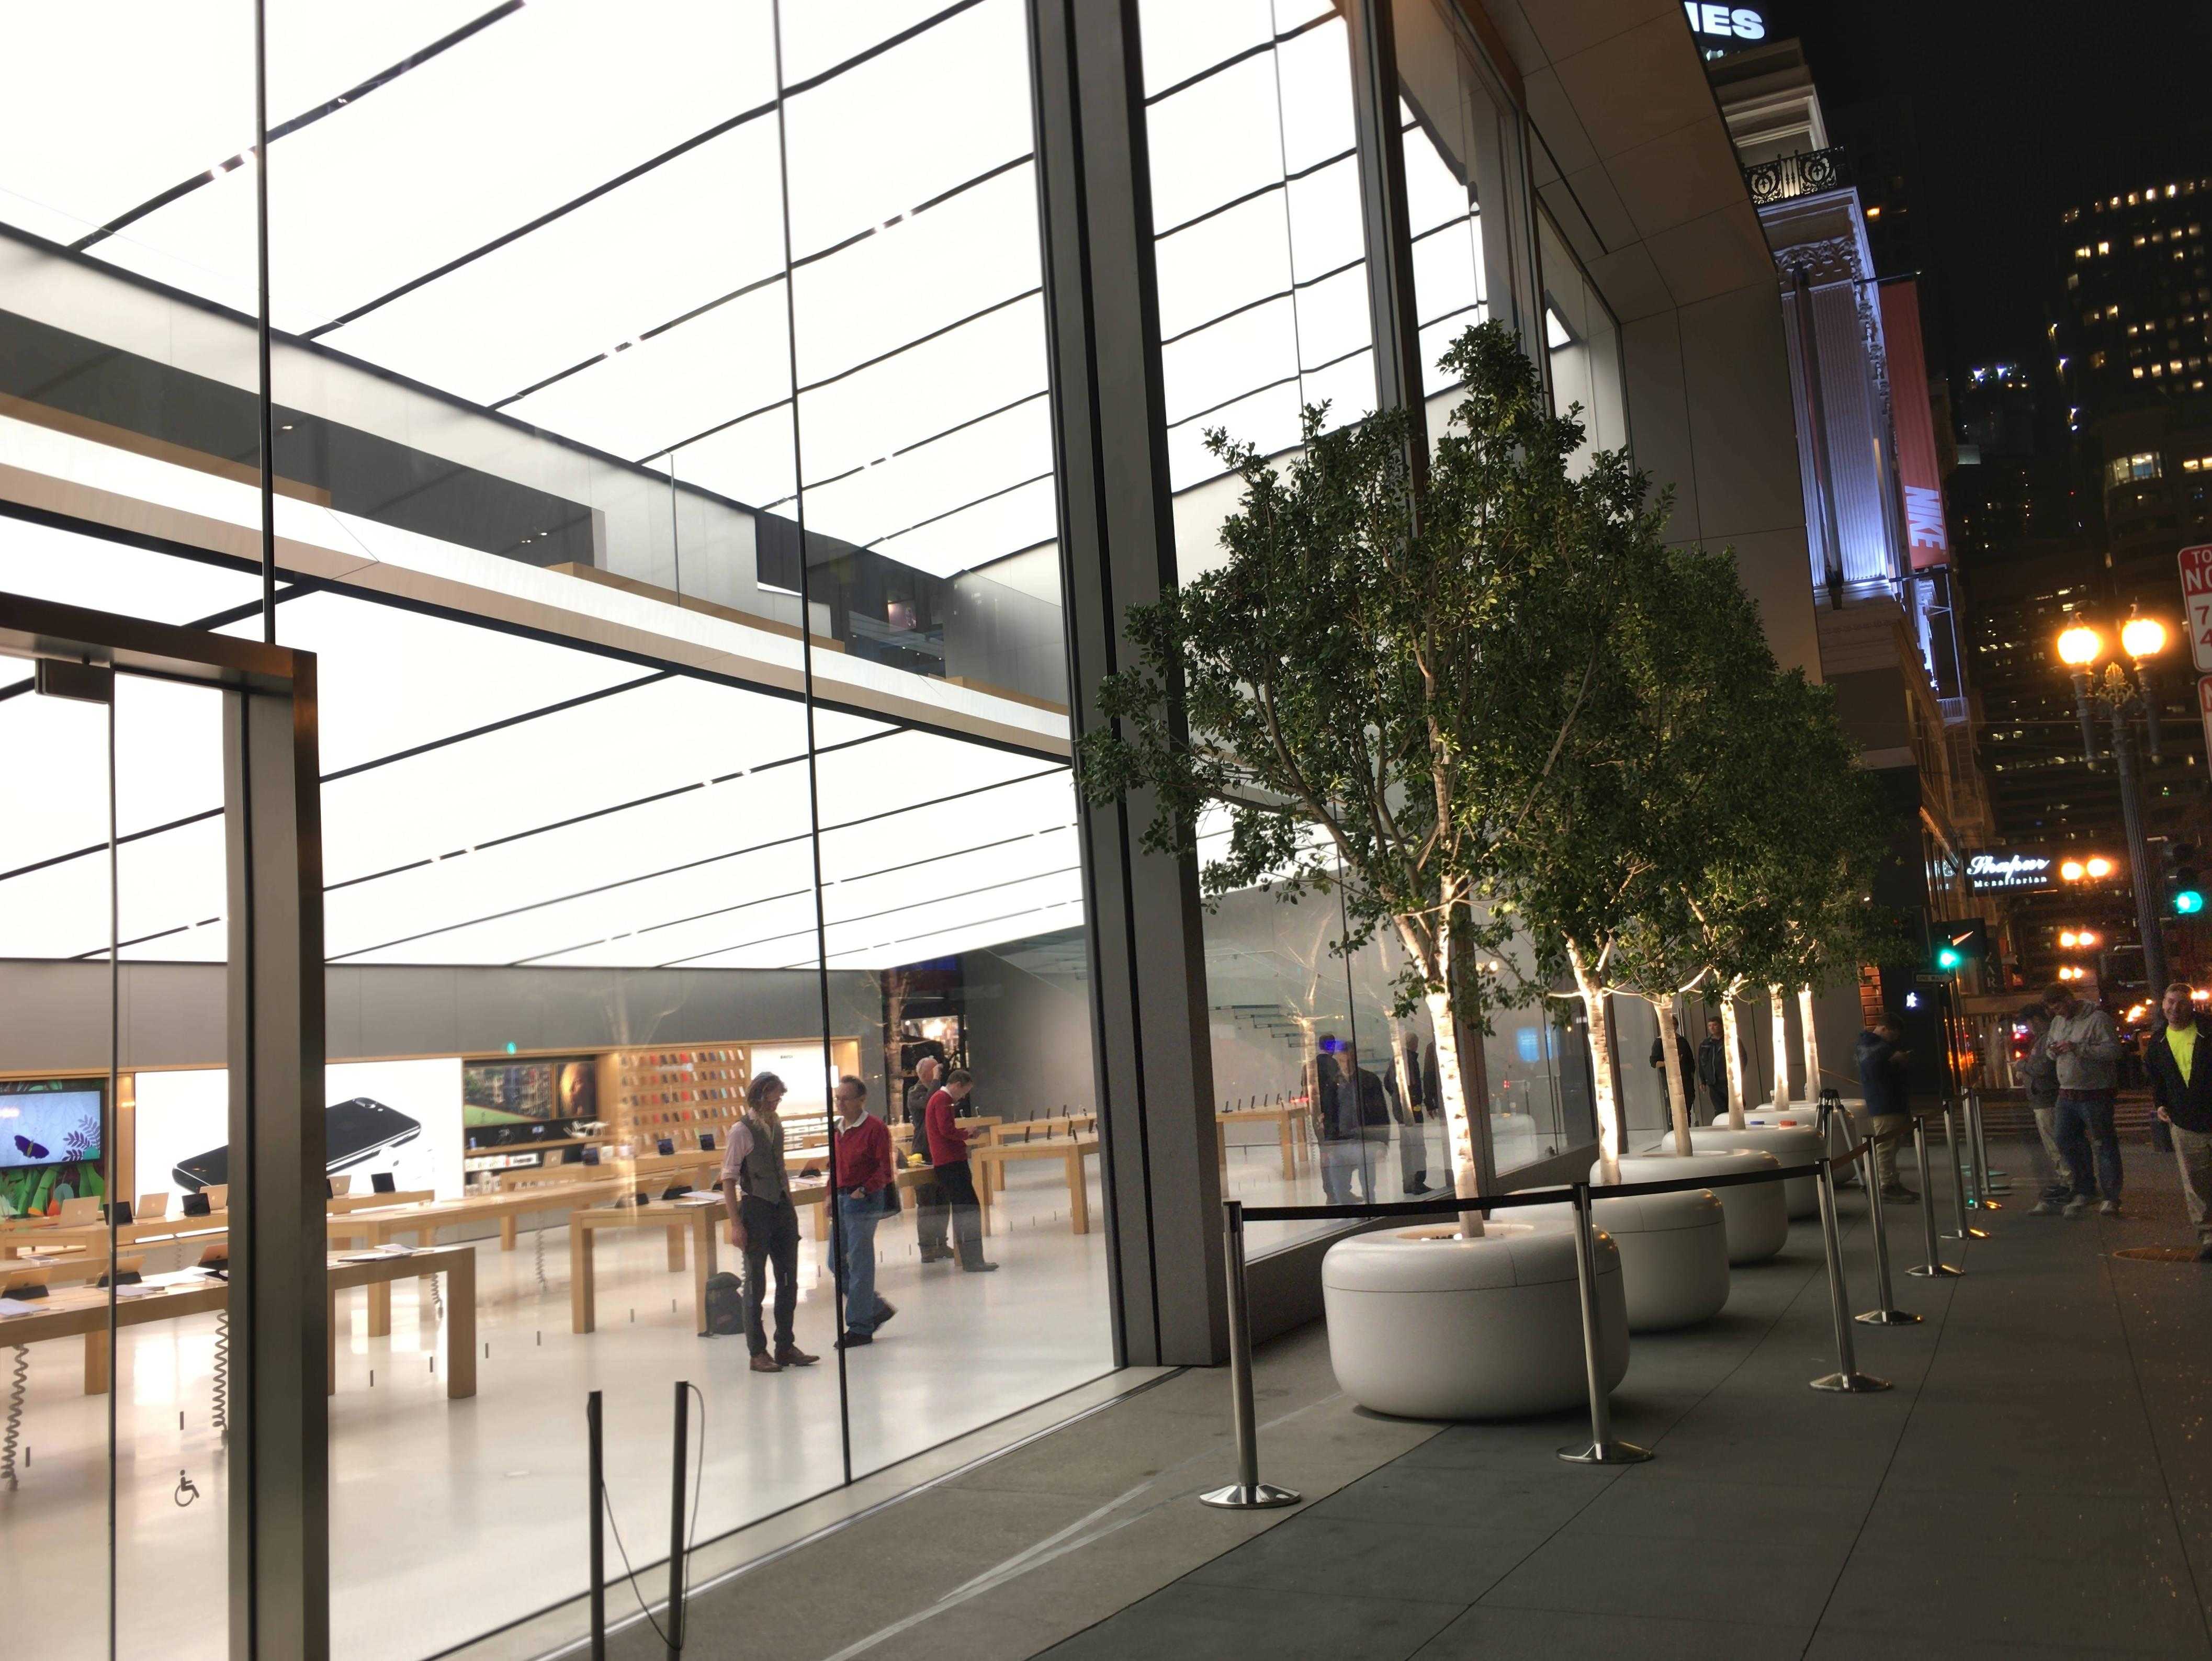 Apple store line dividers suggest new MacBooks will go on sale today